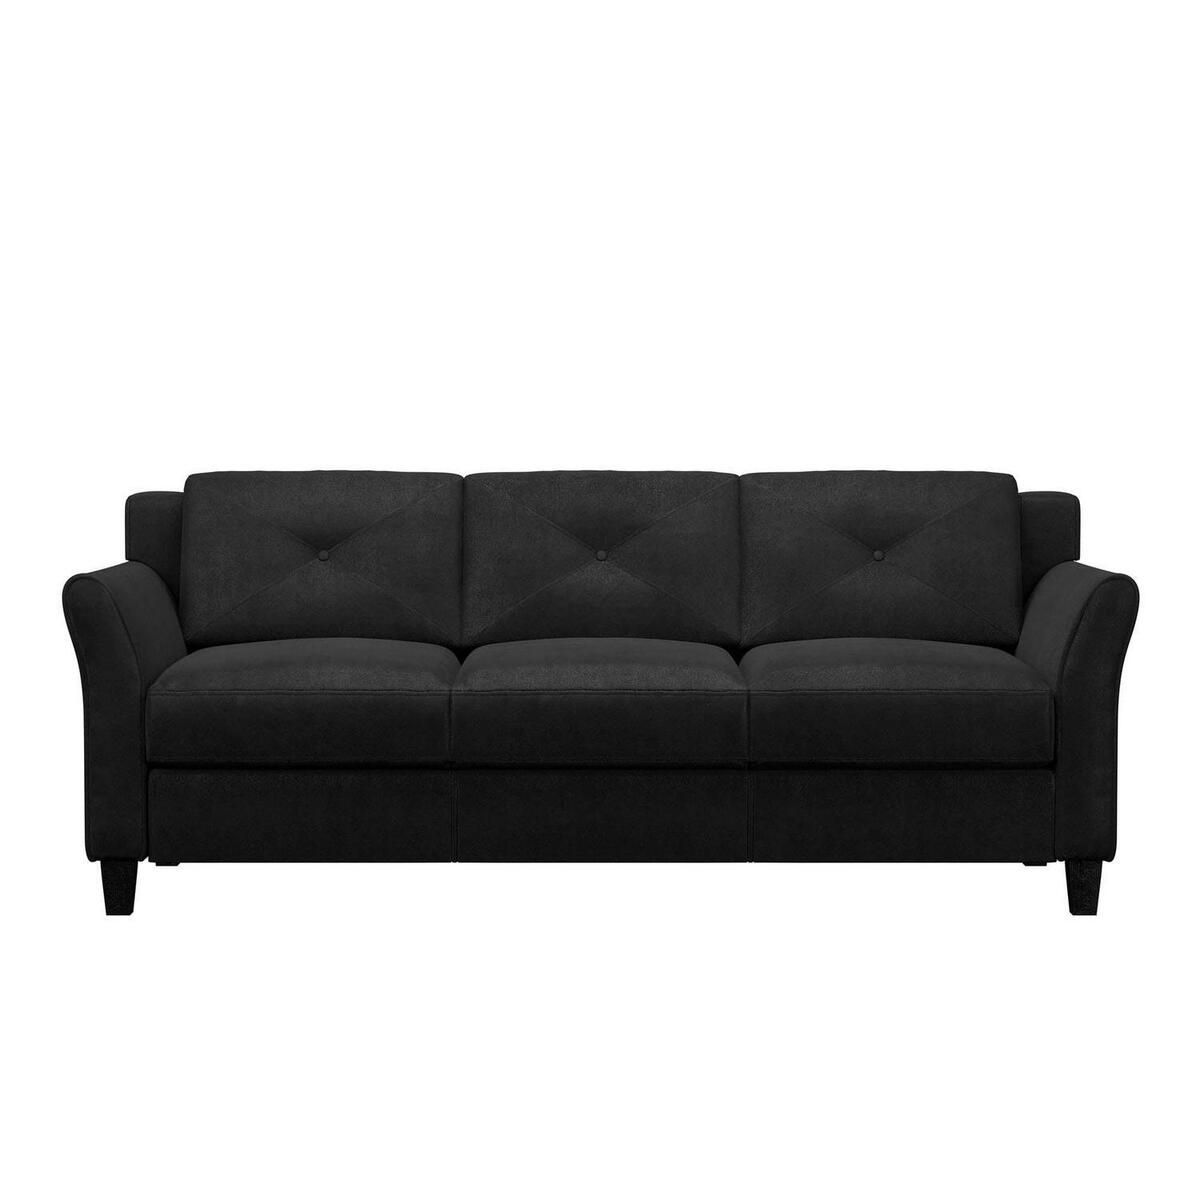 Traditional Sofa Curved Rolled Arms Comfortable Taryn Black Fabric | Ebay Regarding Traditional Black Fabric Sofas (Photo 4 of 15)